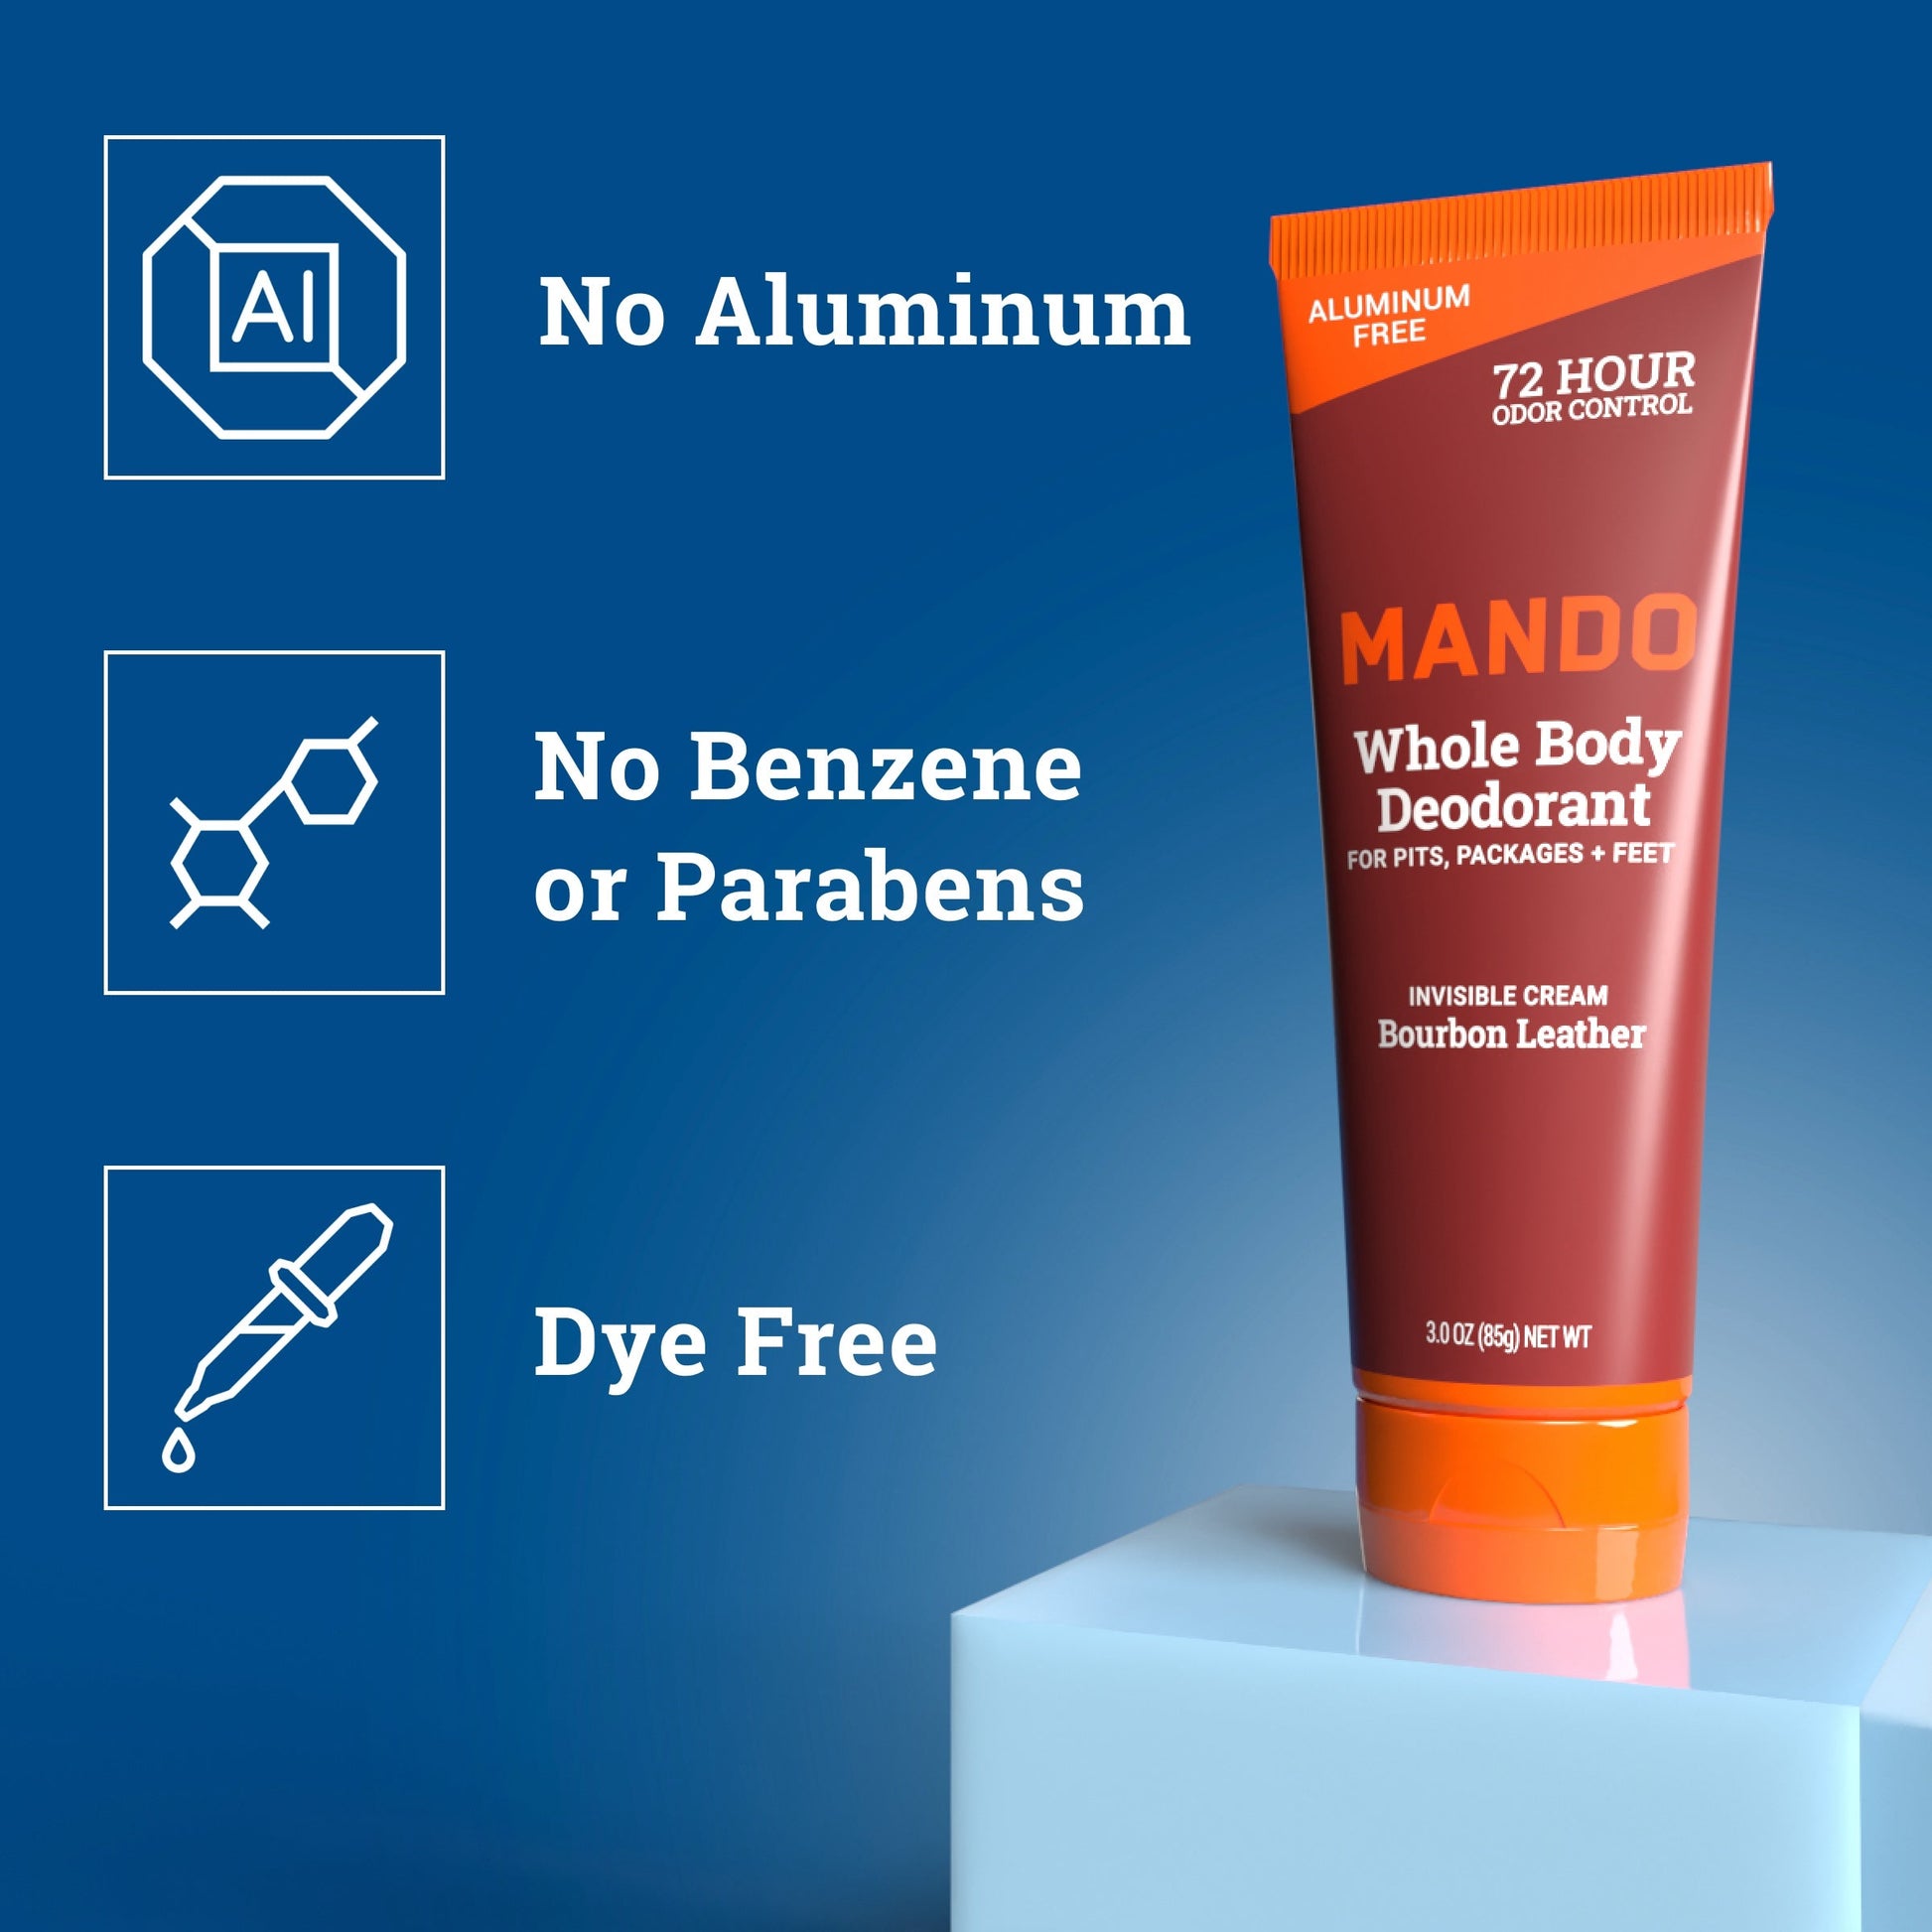 Mando Invisible cream deodorant in bourbon leather scent with text: No Aluminum, No Benzene or Parabens, Bye Free